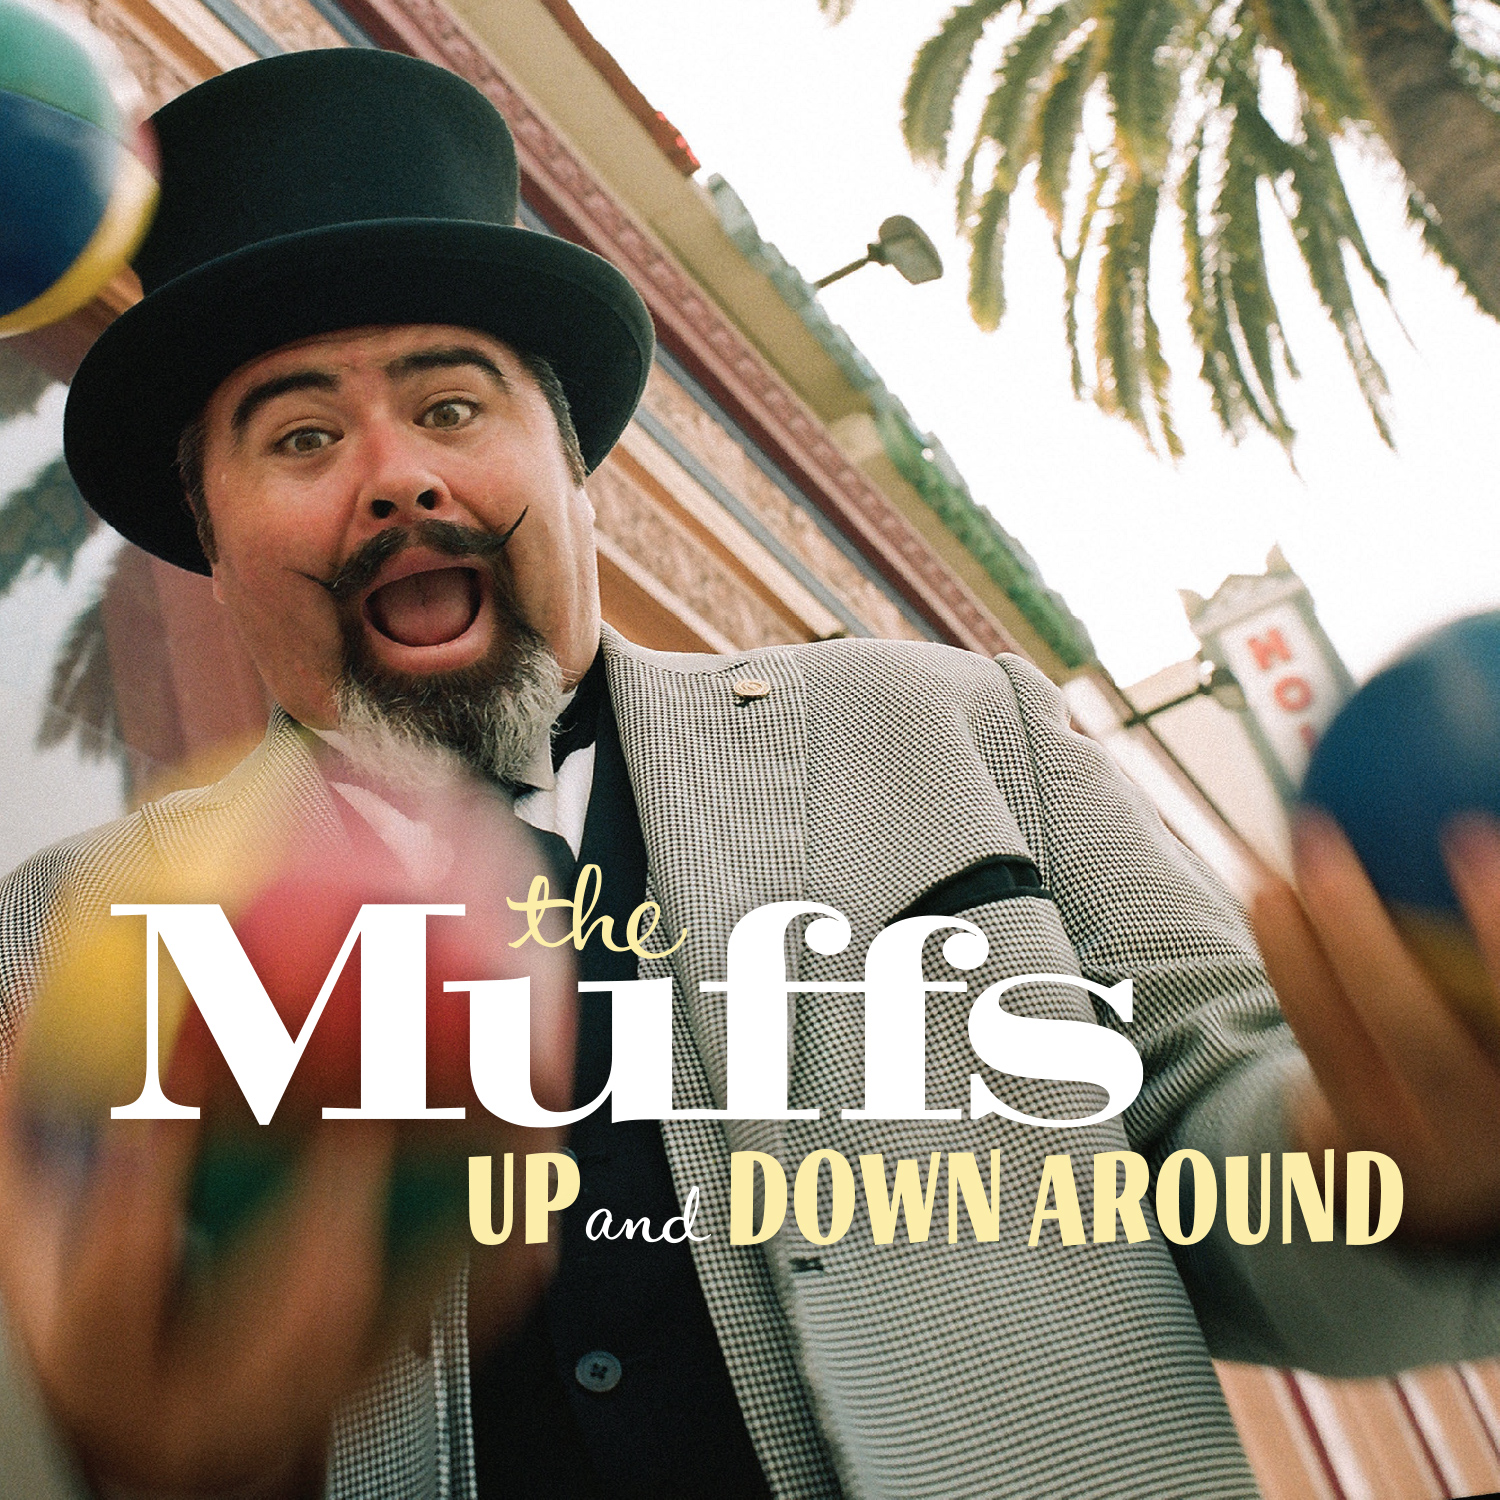 The Muffs - Up and Down Around digital single cover